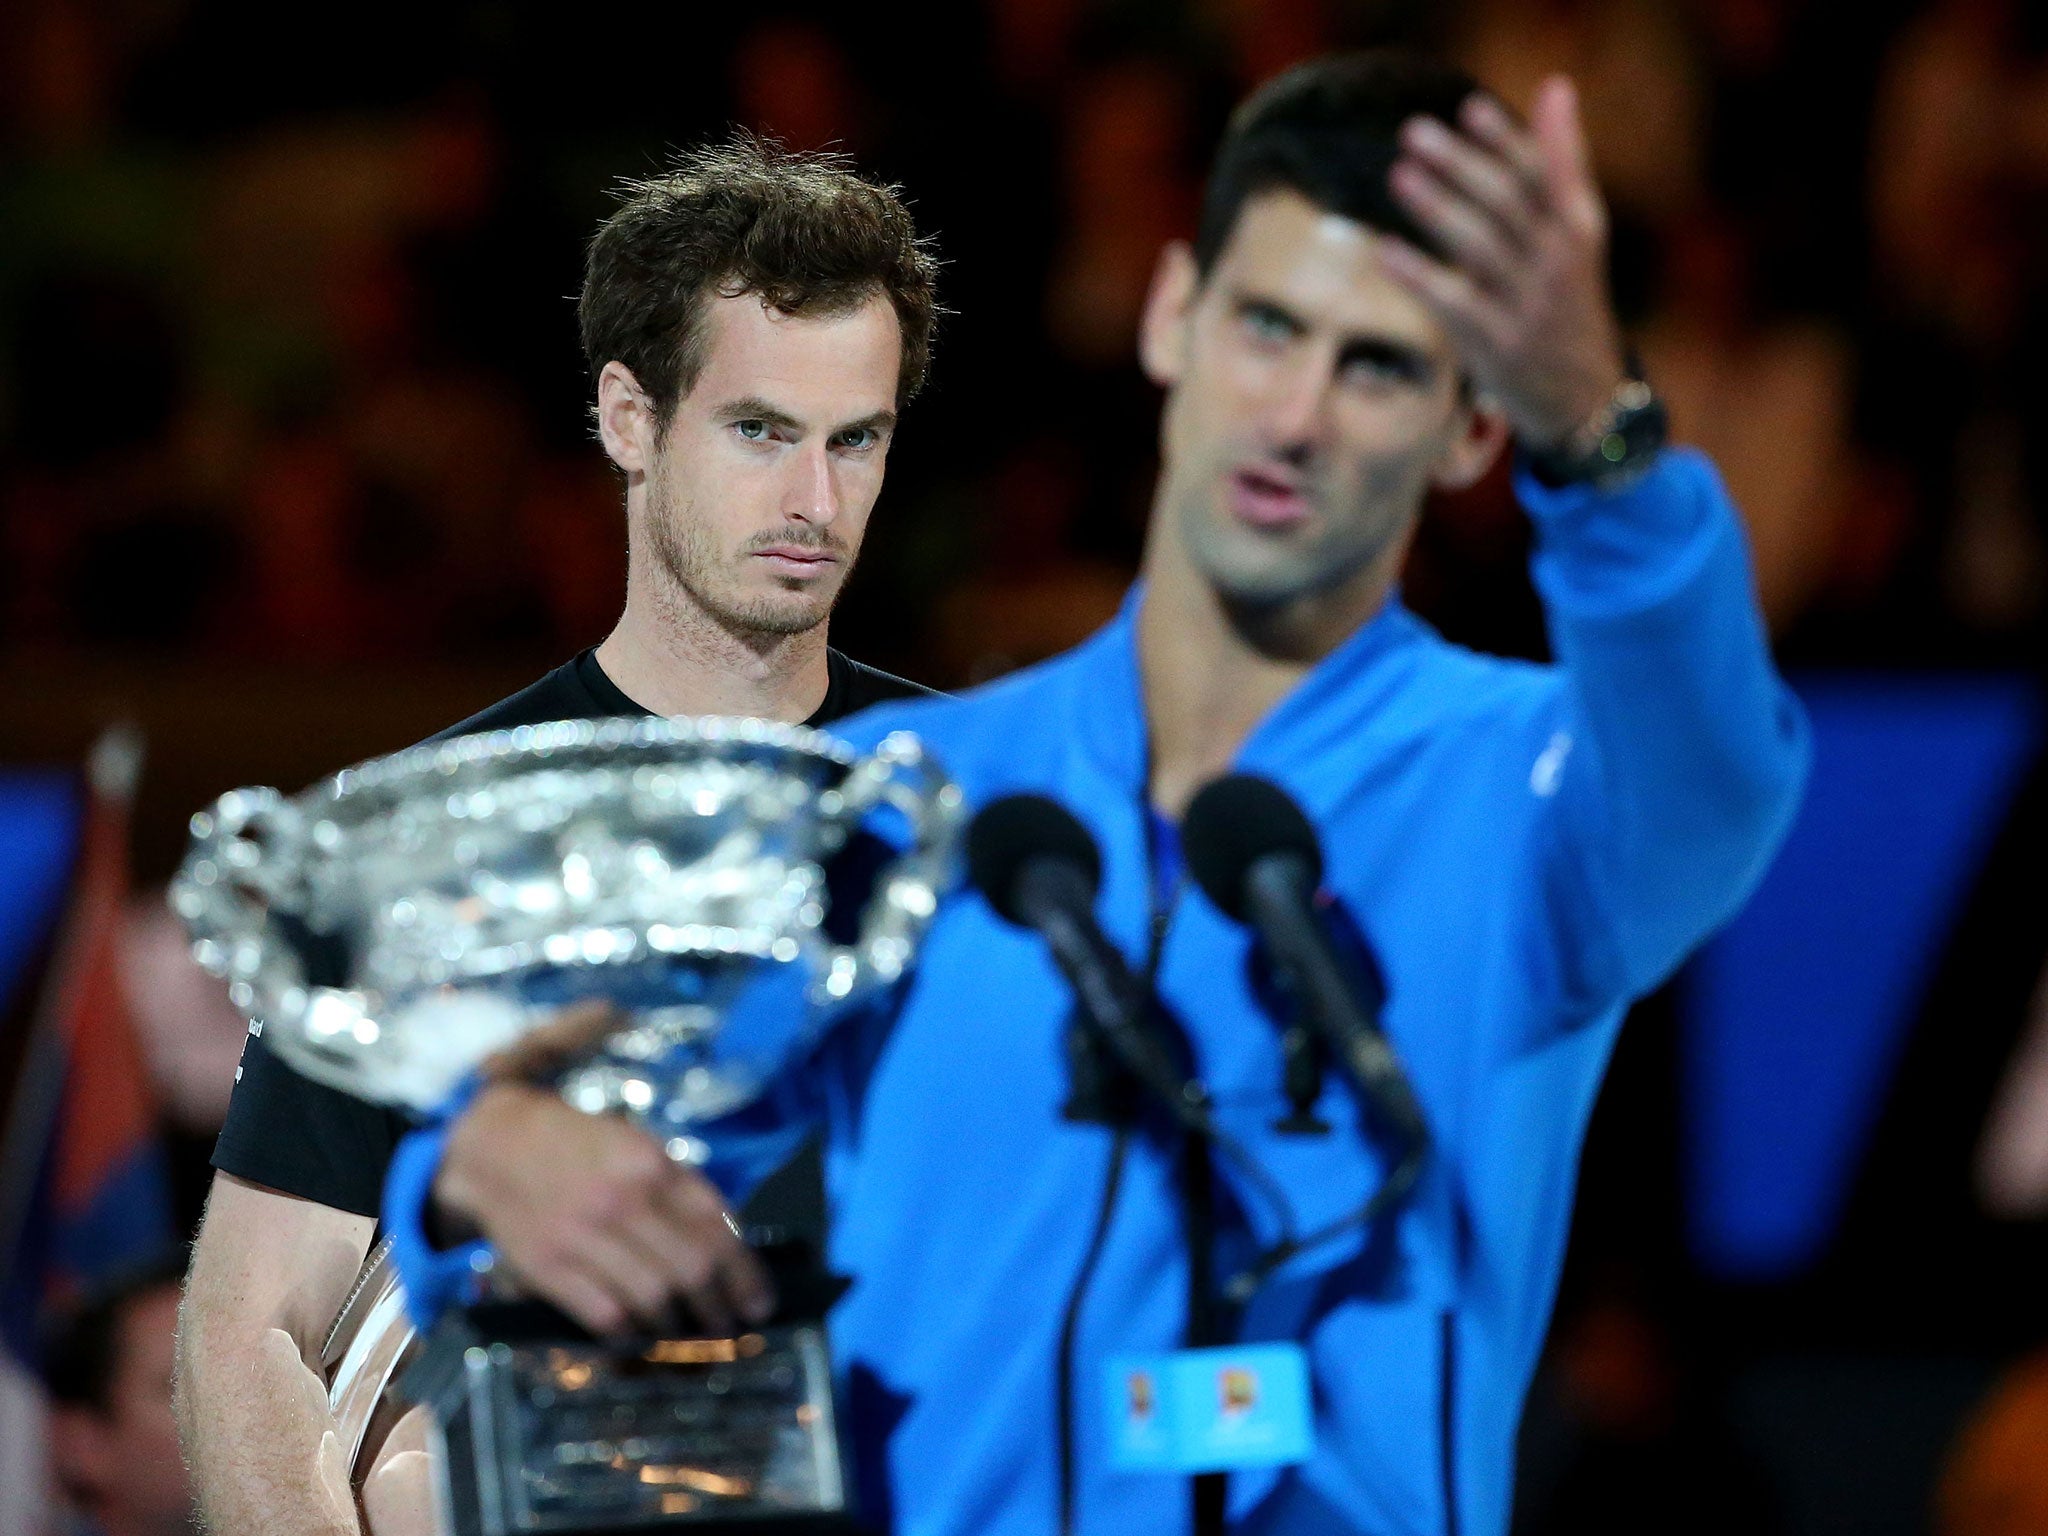 Murray looks on as Djokovic lifts his trophy